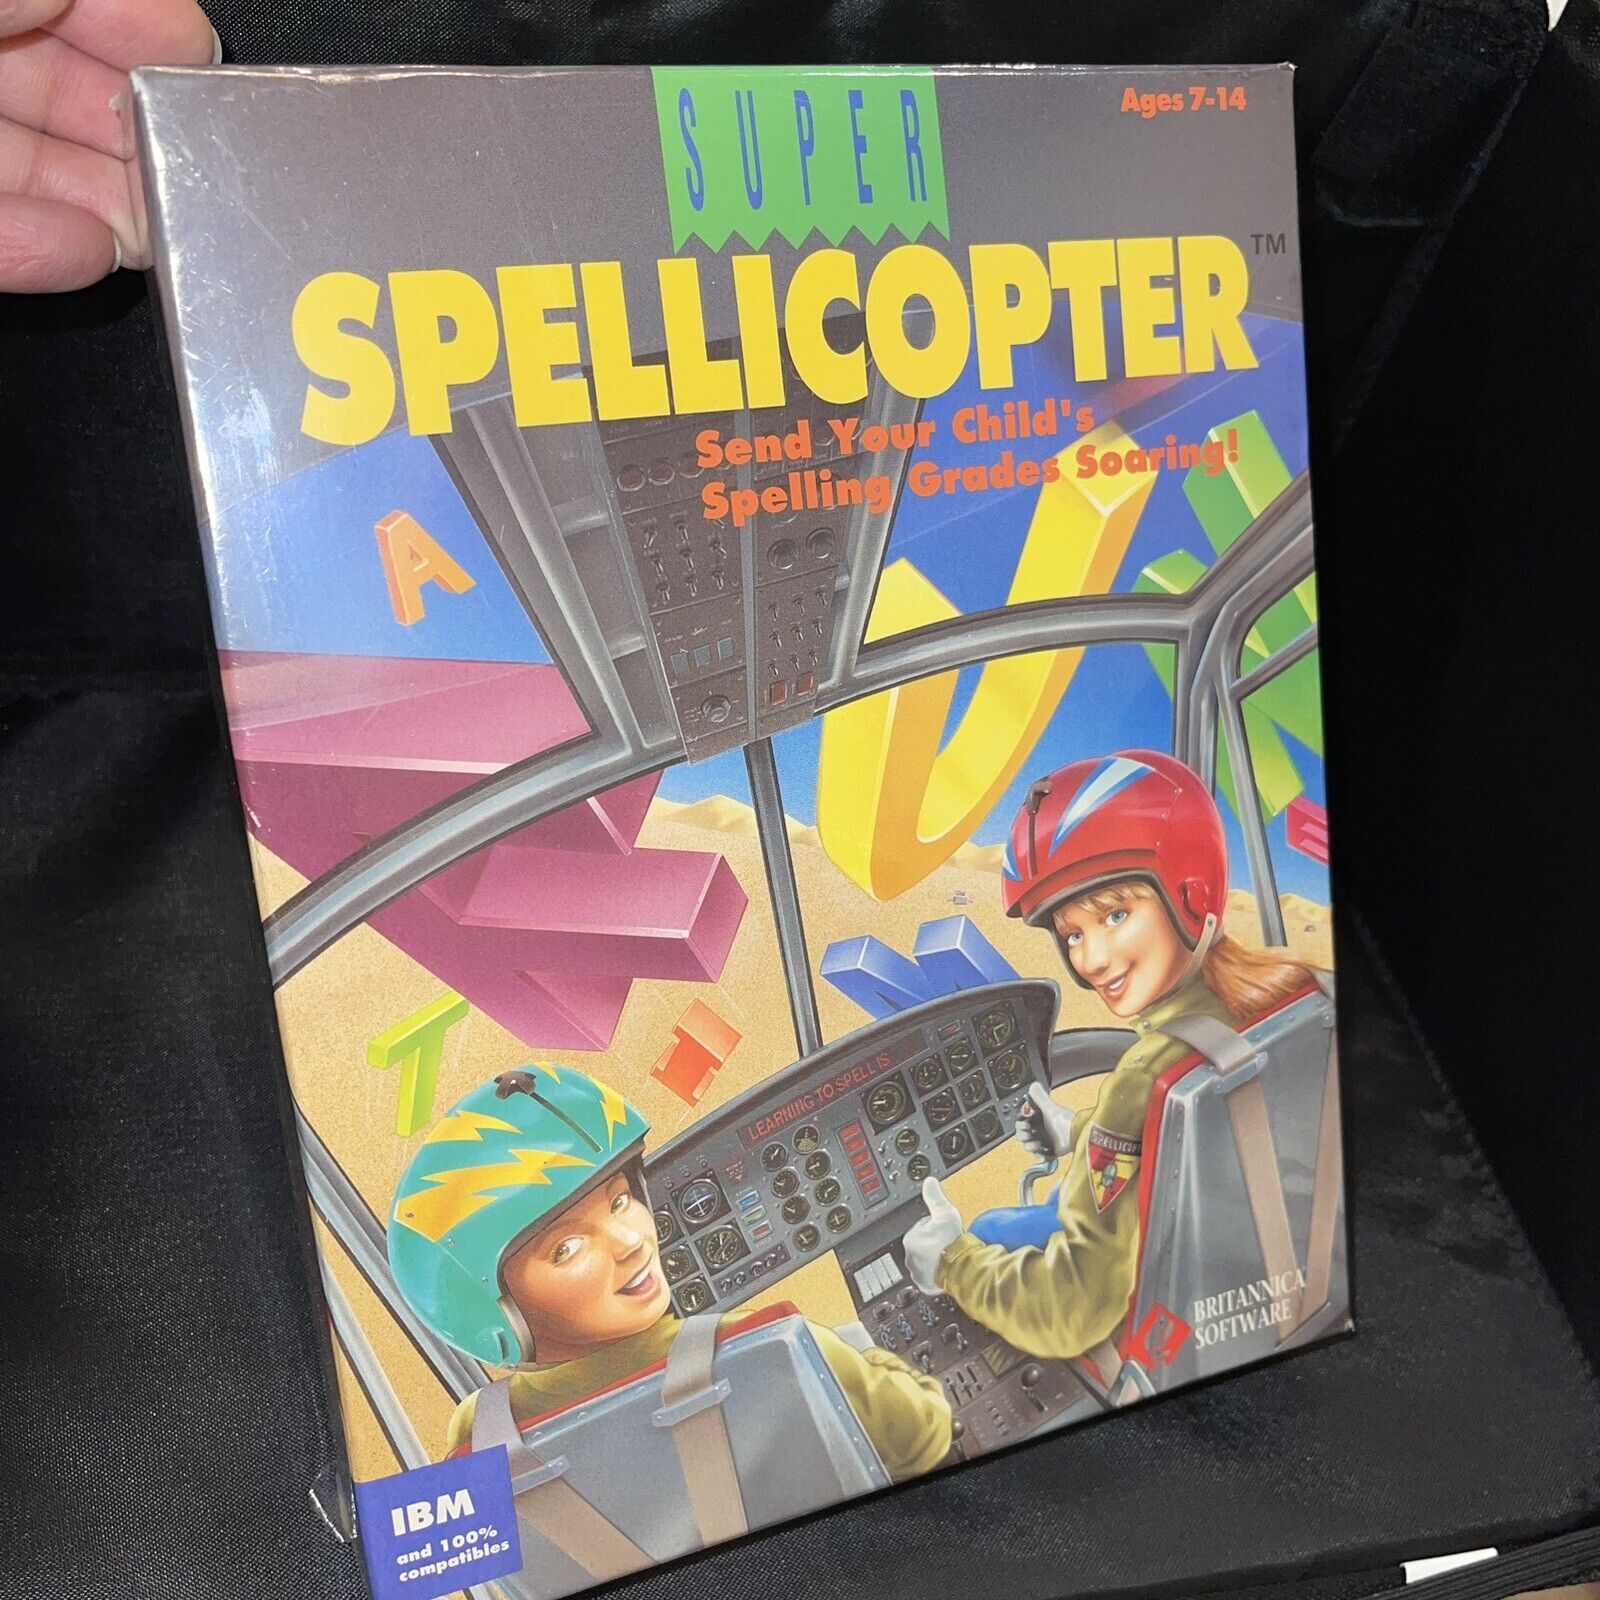 Super Spellicopter Vintage PC CD game classic spelling action spell words fly